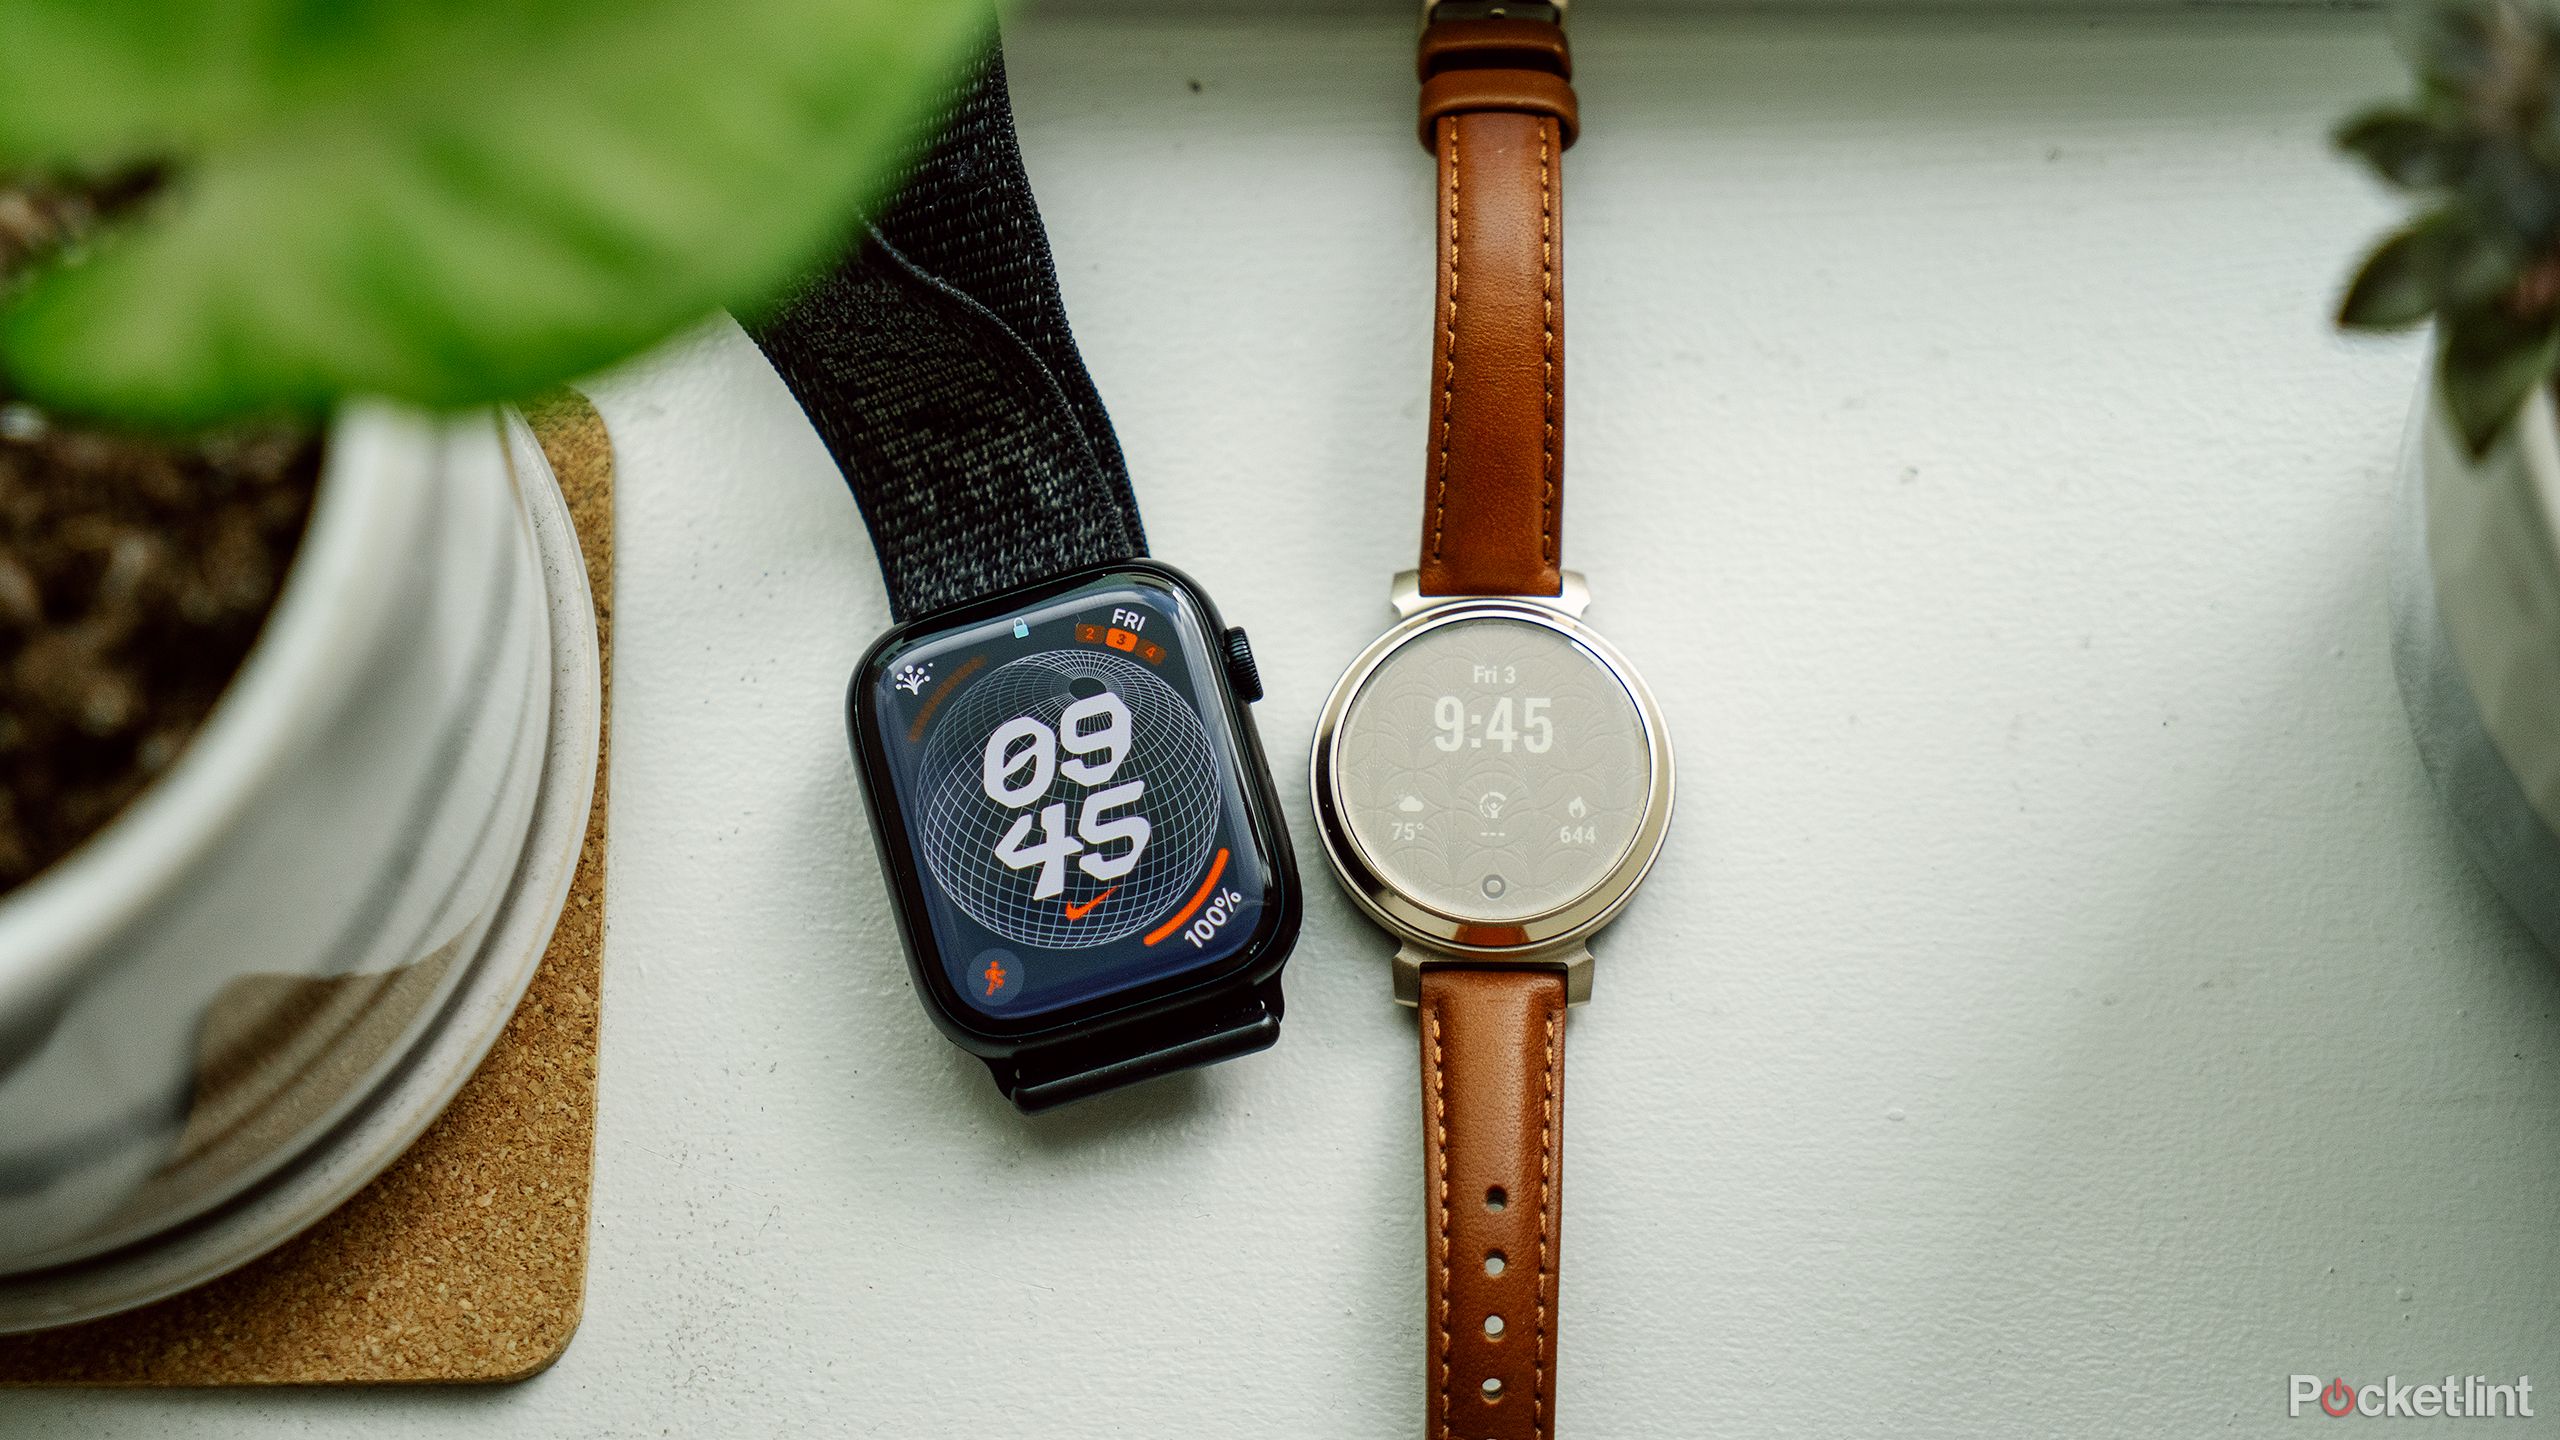 The Garmin Lily 2 next to the Apple Watch on a windowsill with a plant. 